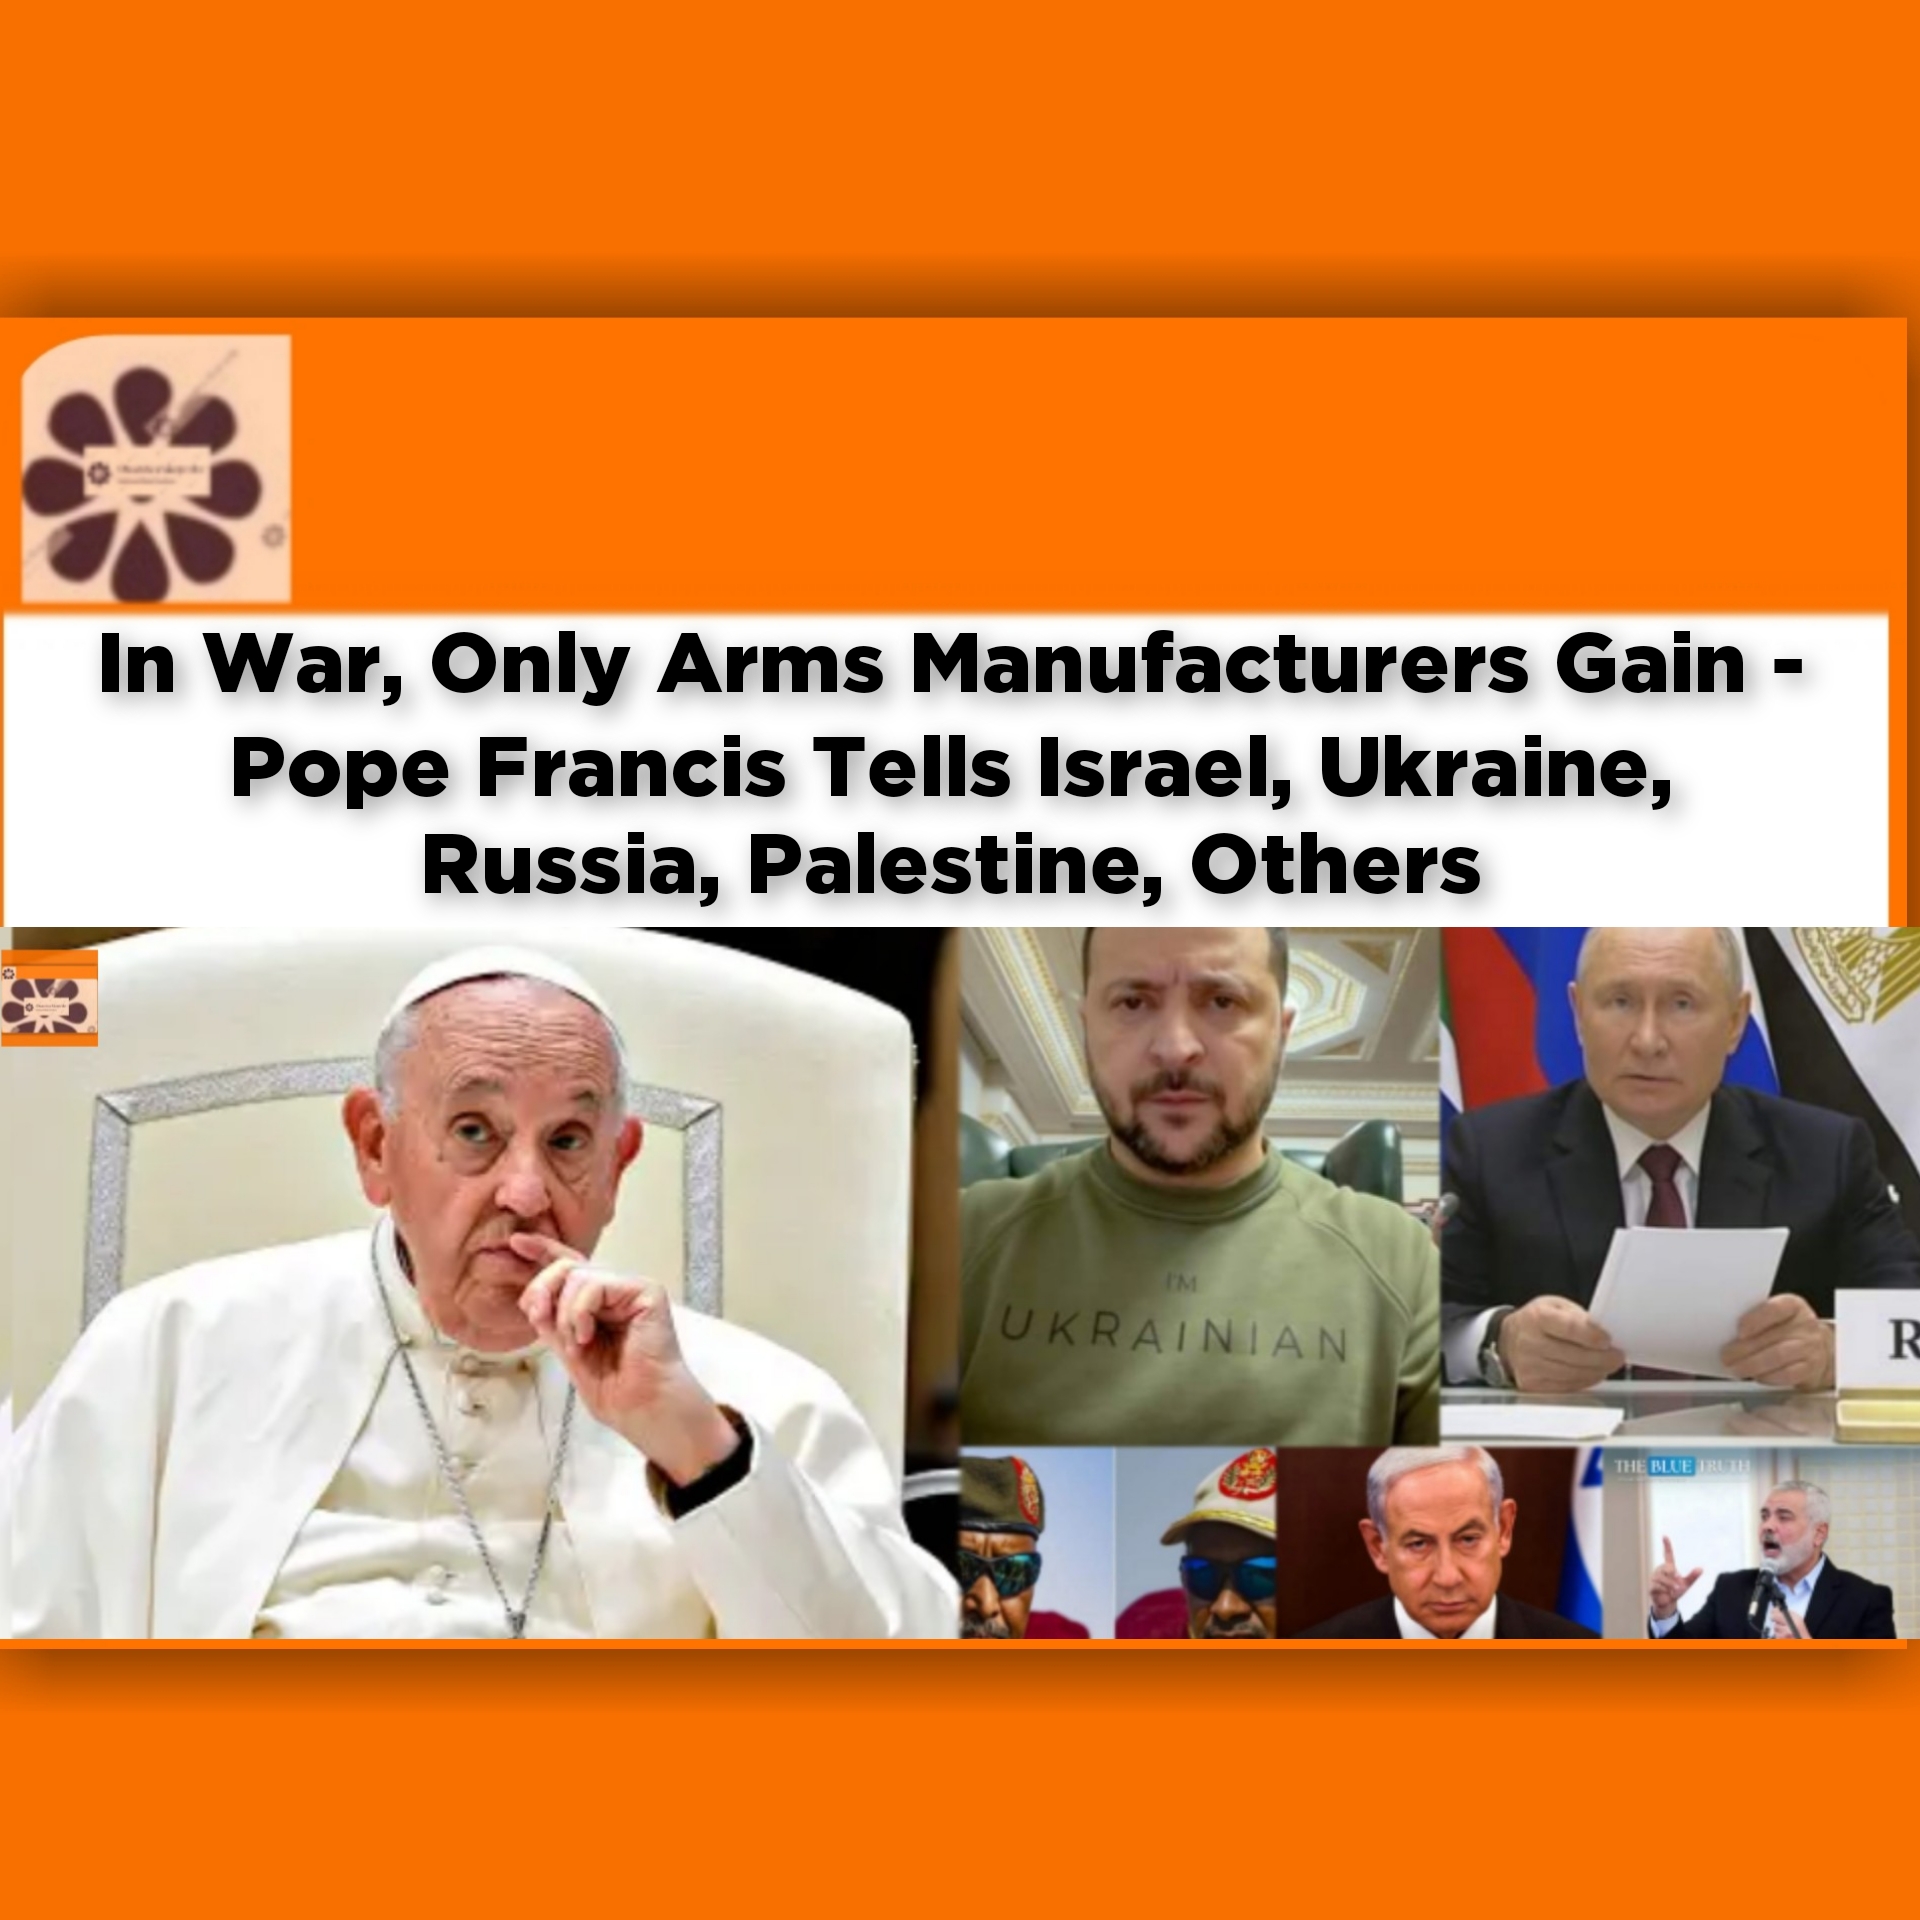 In War, Only Arms Manufacturers Gain - Pope Francis Tells Israel, Ukraine, Russia, Palestine, Others ~ OsazuwaAkonedo #Femi